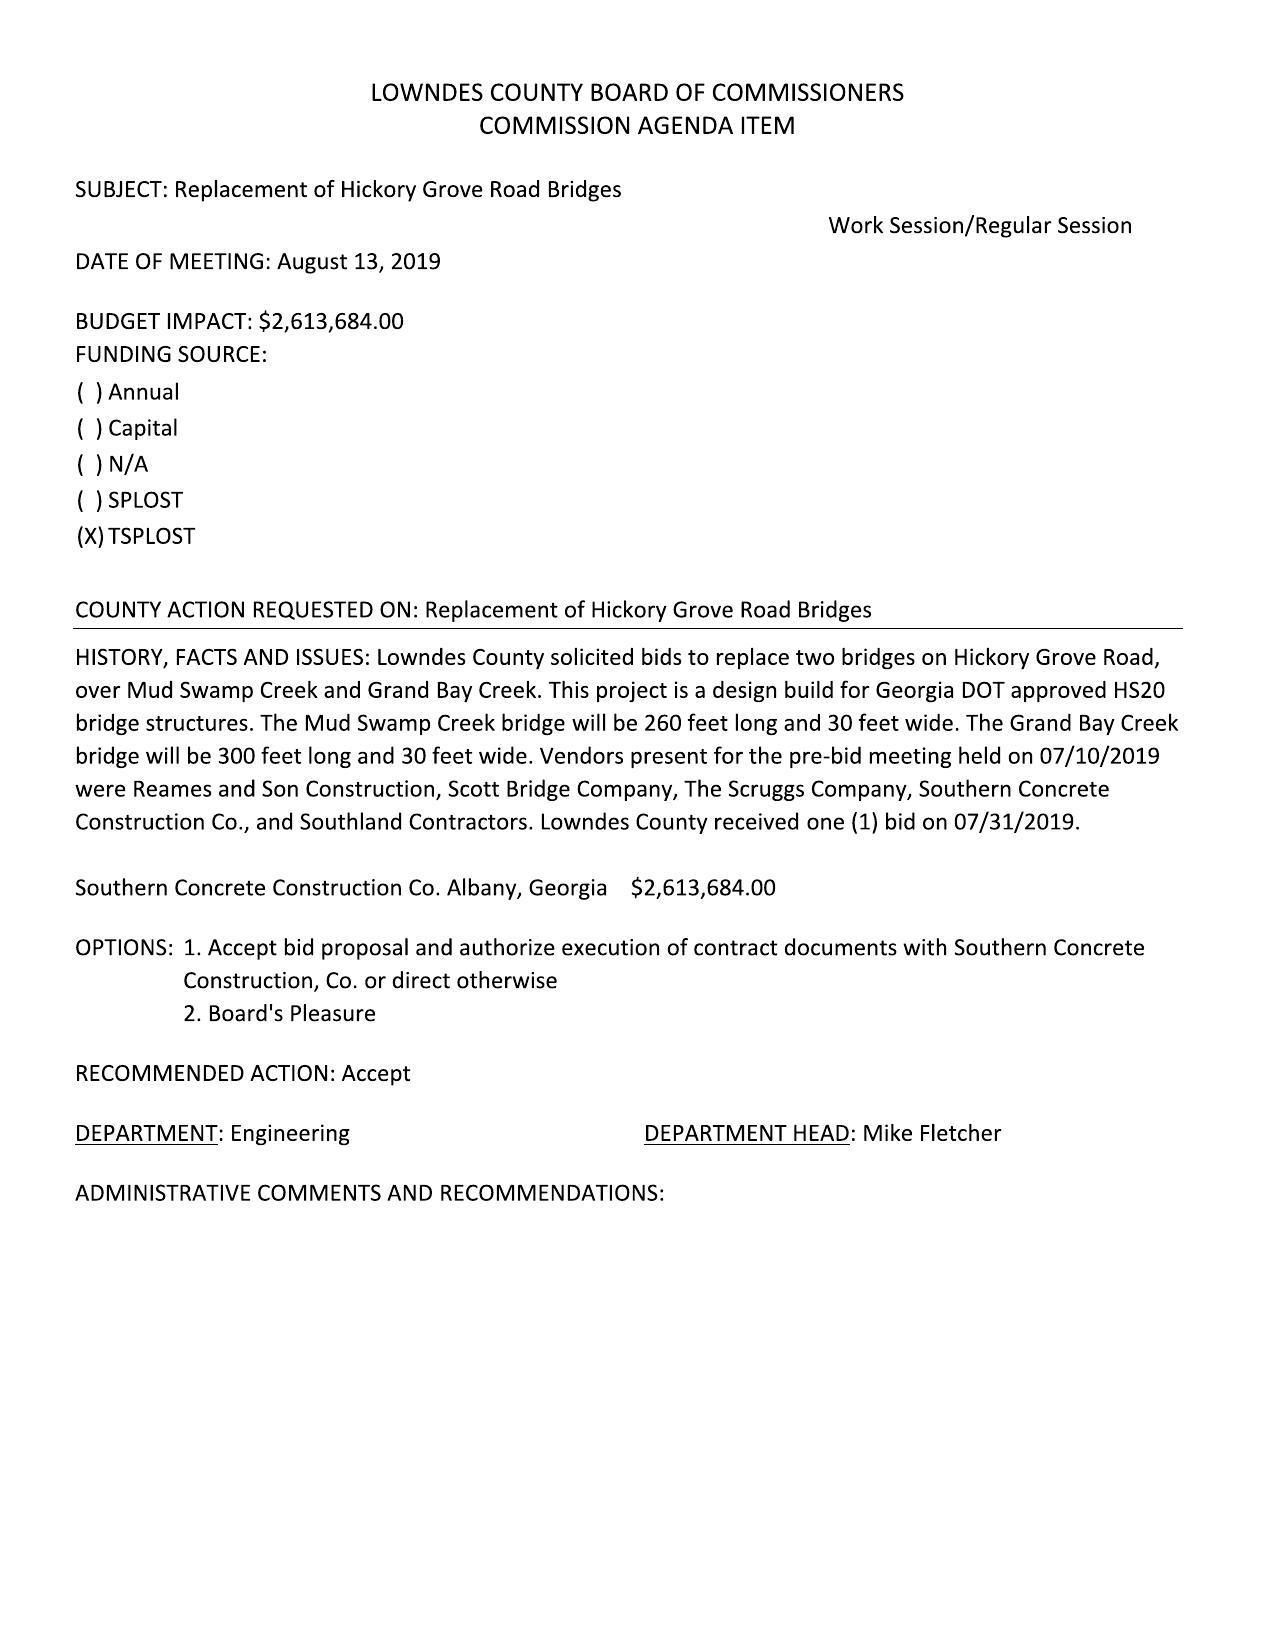 Replacement of Hickory Grove Road Bridges Work Session/Regular Session DATE OF MEETING: August 13, 2019